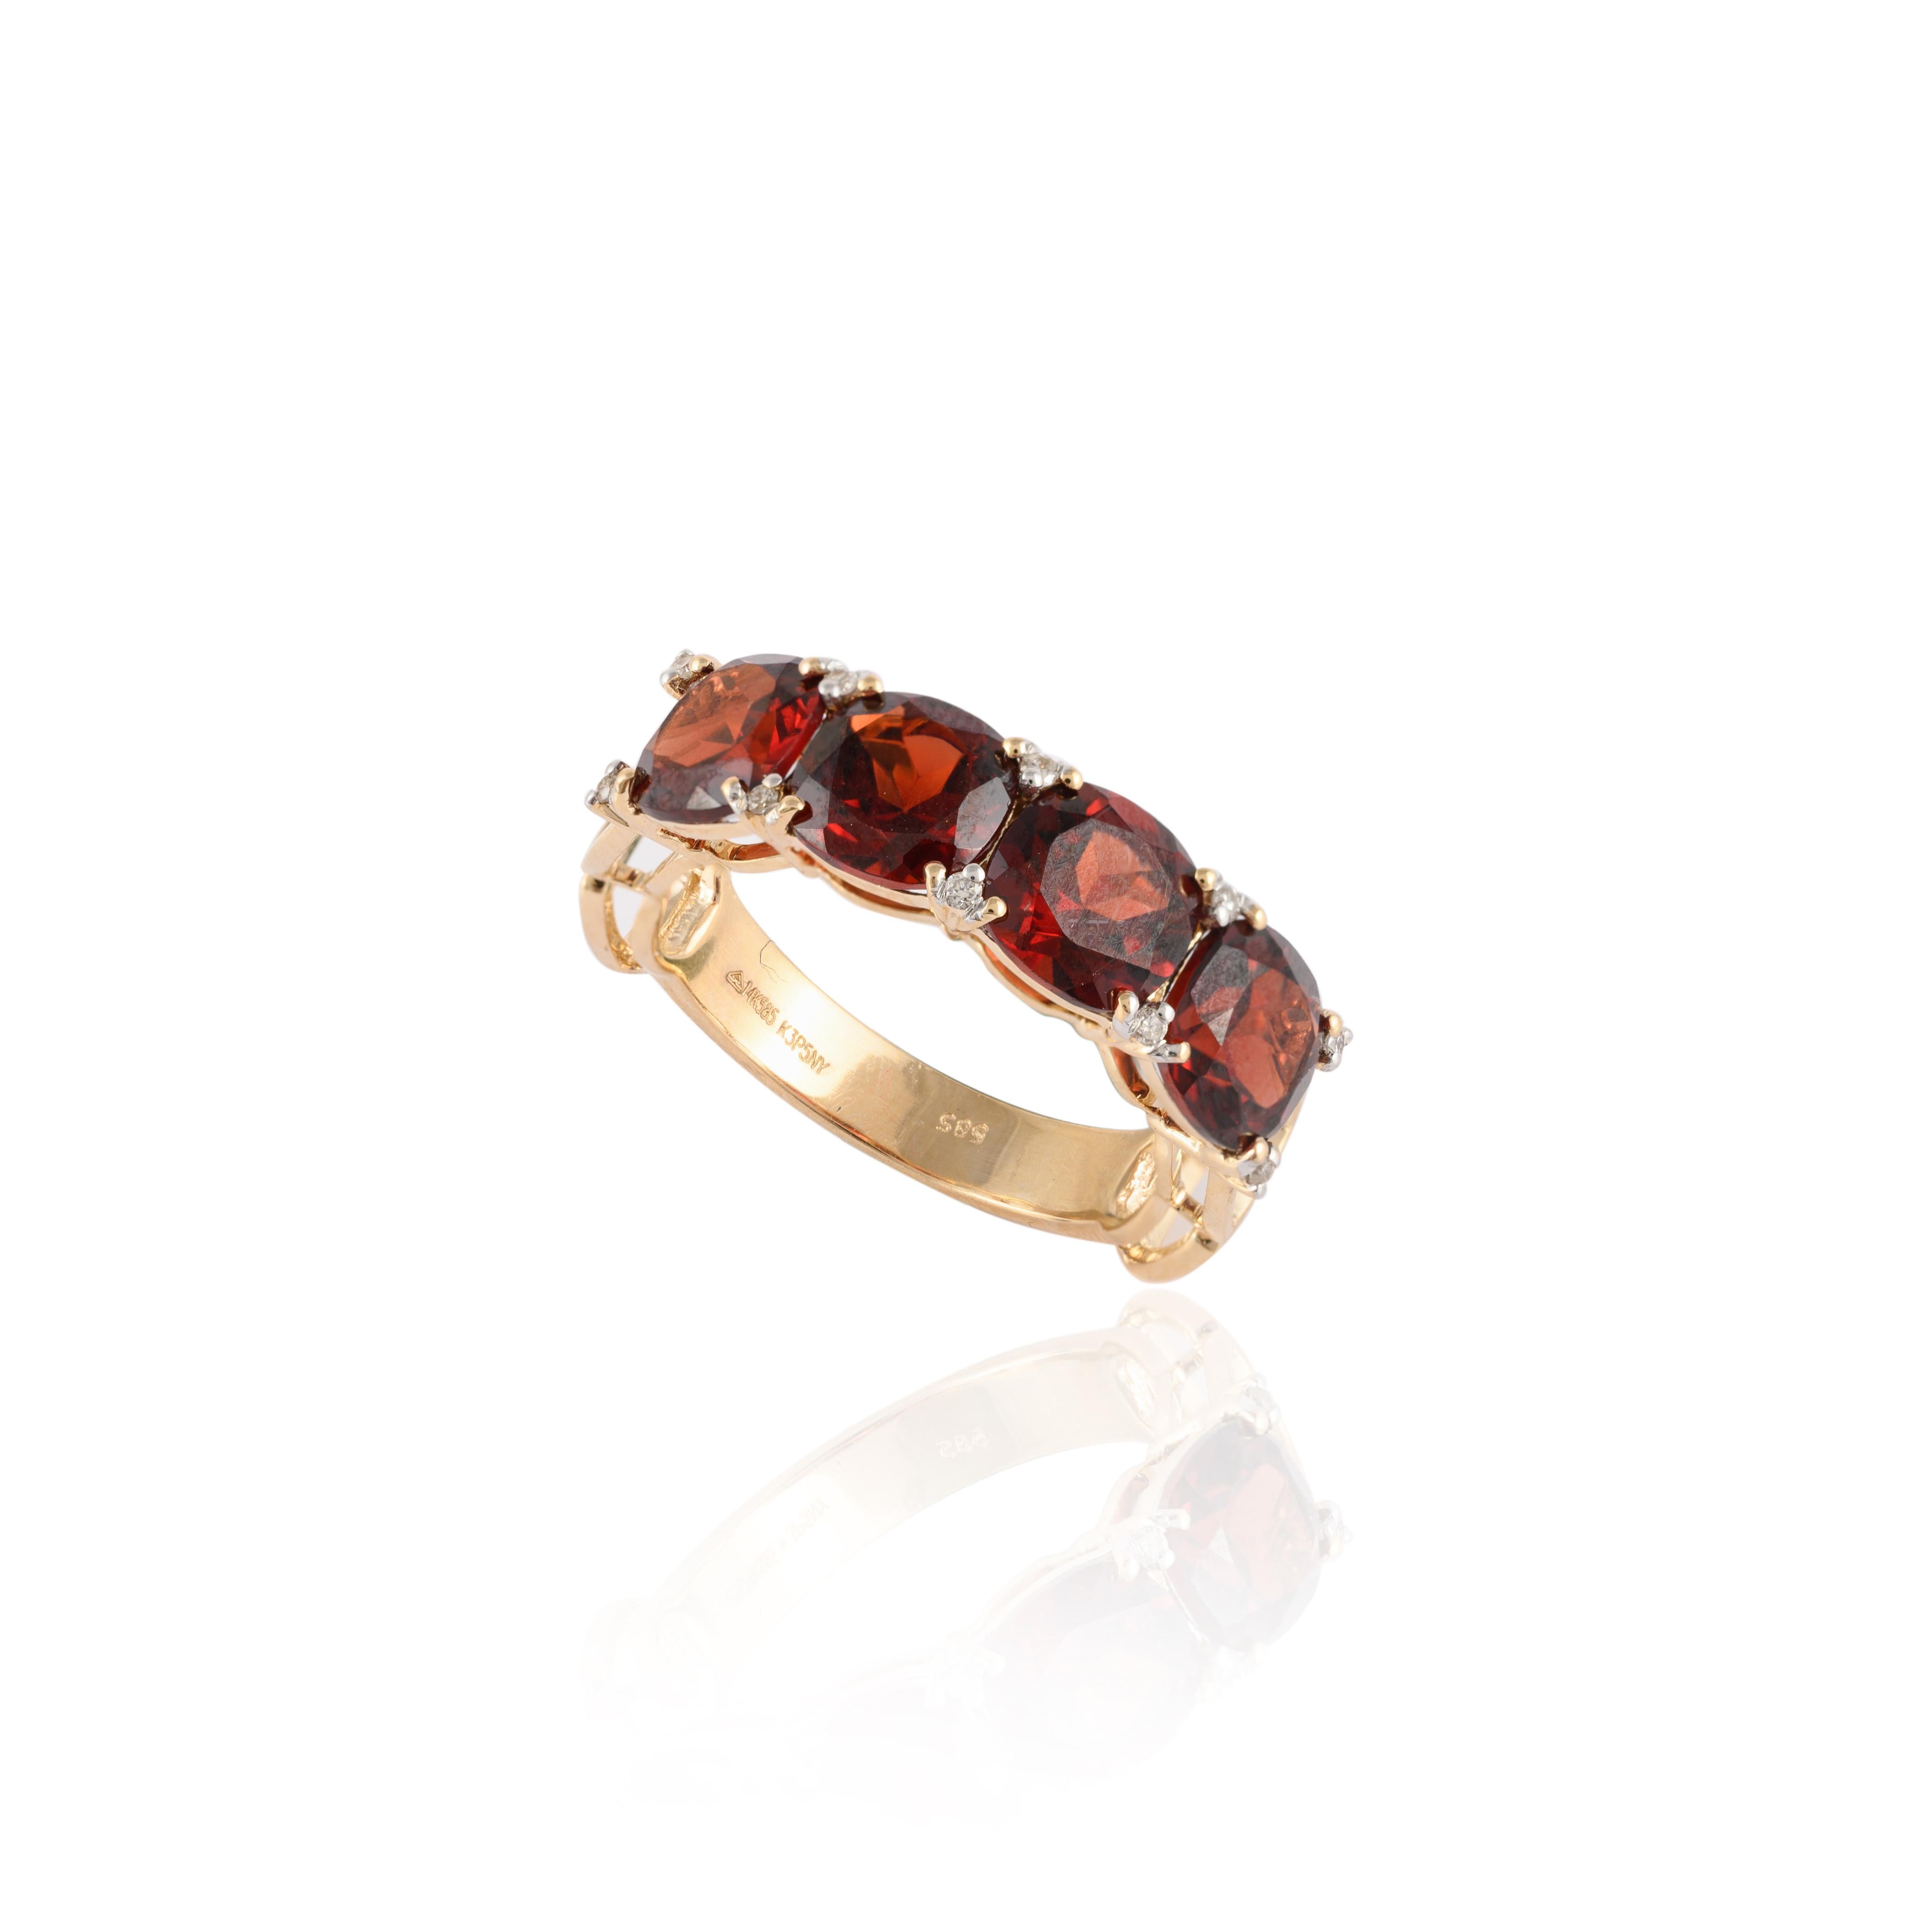 For Sale:  14k Solid Yellow Gold Natural 4.75 Carat Garnet Ring with Diamonds for Her 8